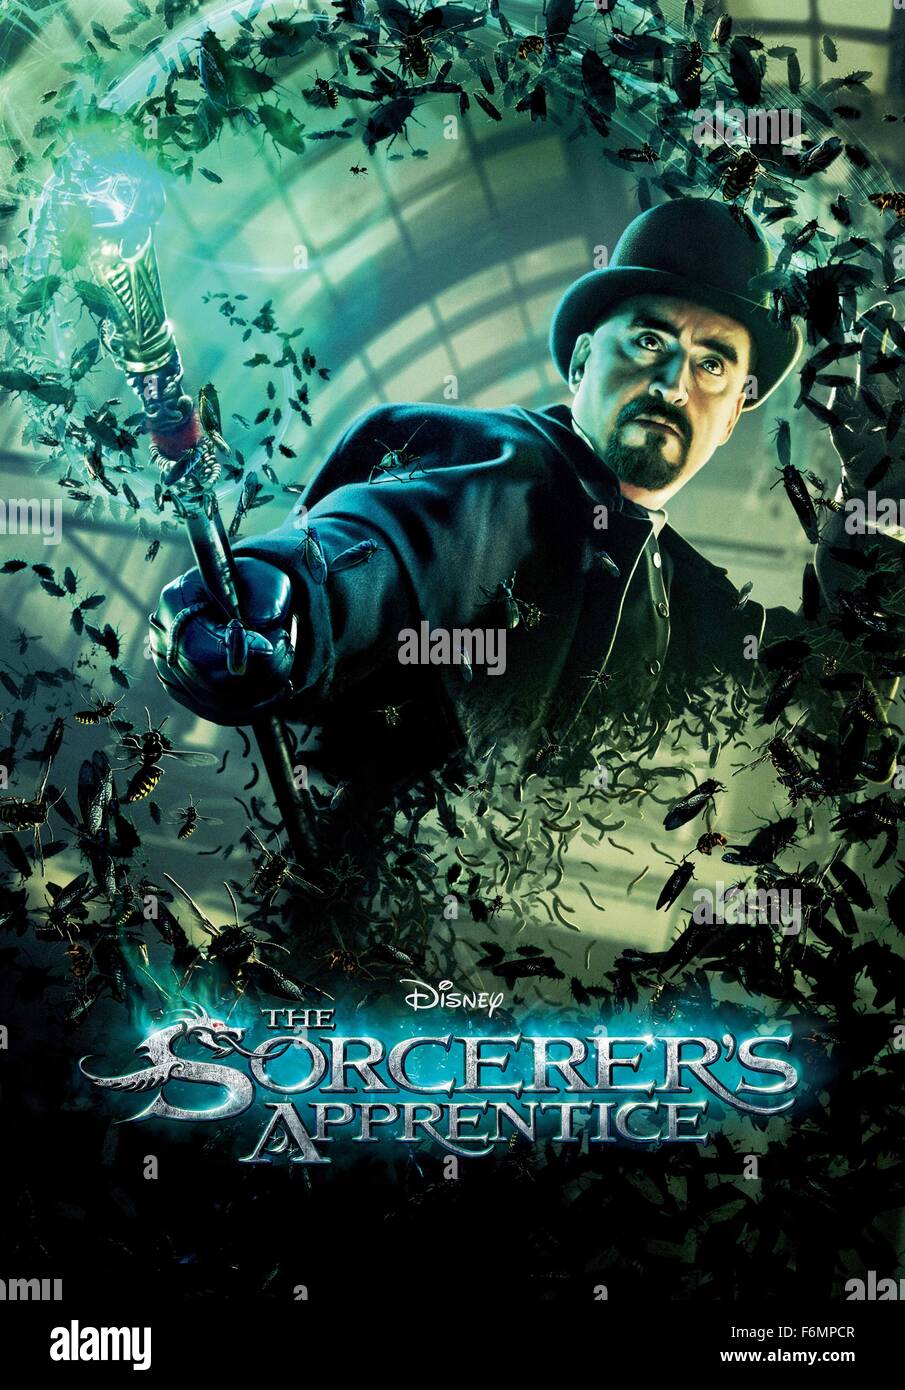 RELEASE DATE: July 16, 2010. MOVIE TITLE: The Sorcerer's Apprentice. STUDIO: Walt Disney Pictures. PLOT: A sorcerer leaves his workshop in the hands of his apprentice, who gets into trouble when the broomstick he's tasked to do his chores for him somehow develops a mind of its own. PICTURED: Movie poster. Stock Photo